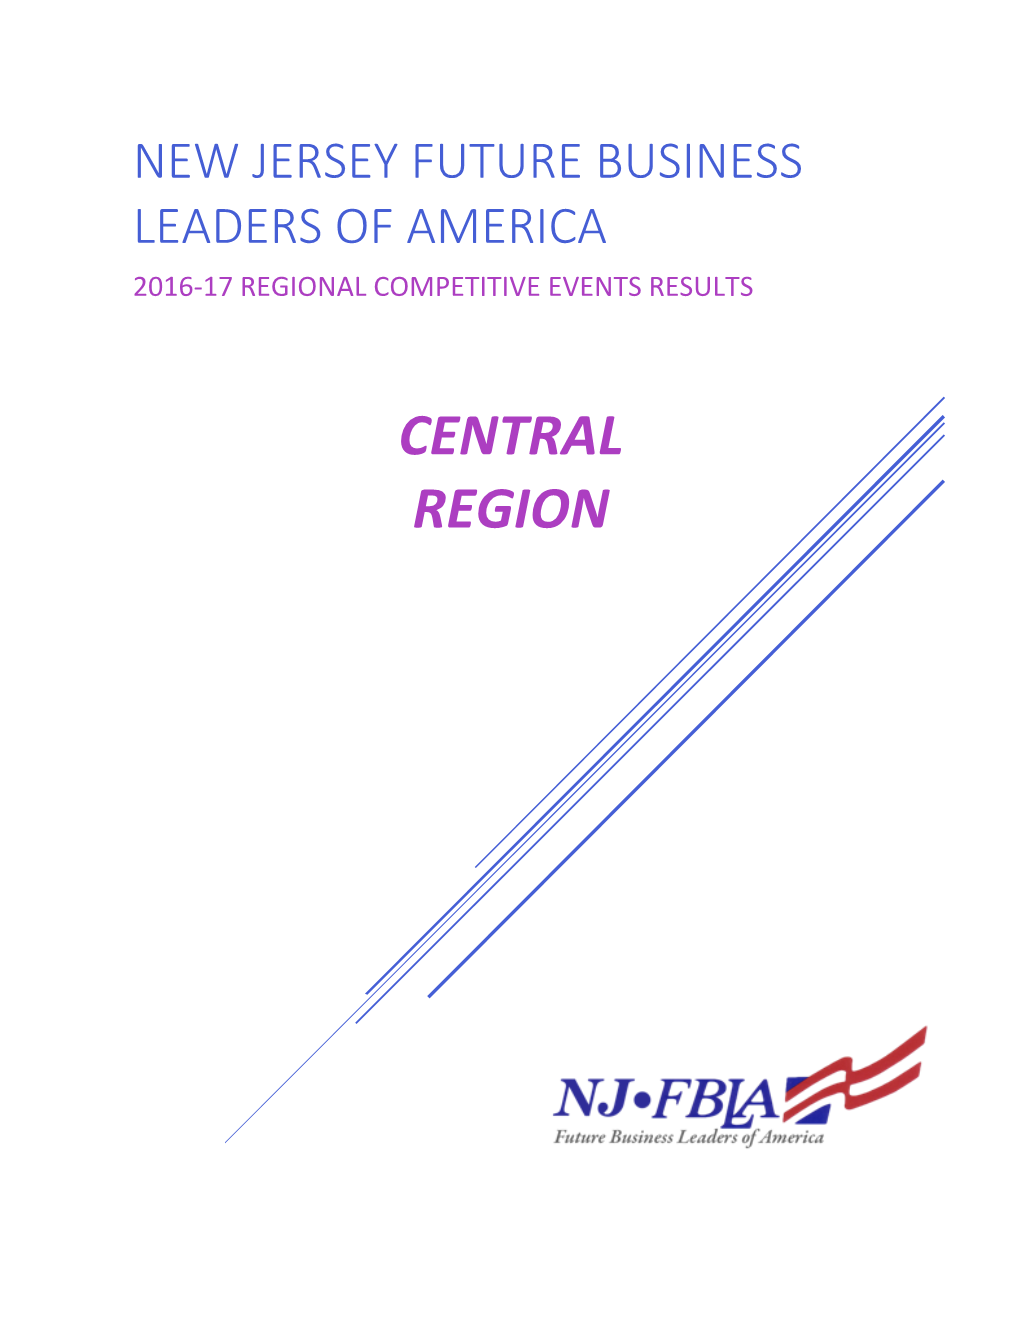 New Jersey Future Business Leaders of America